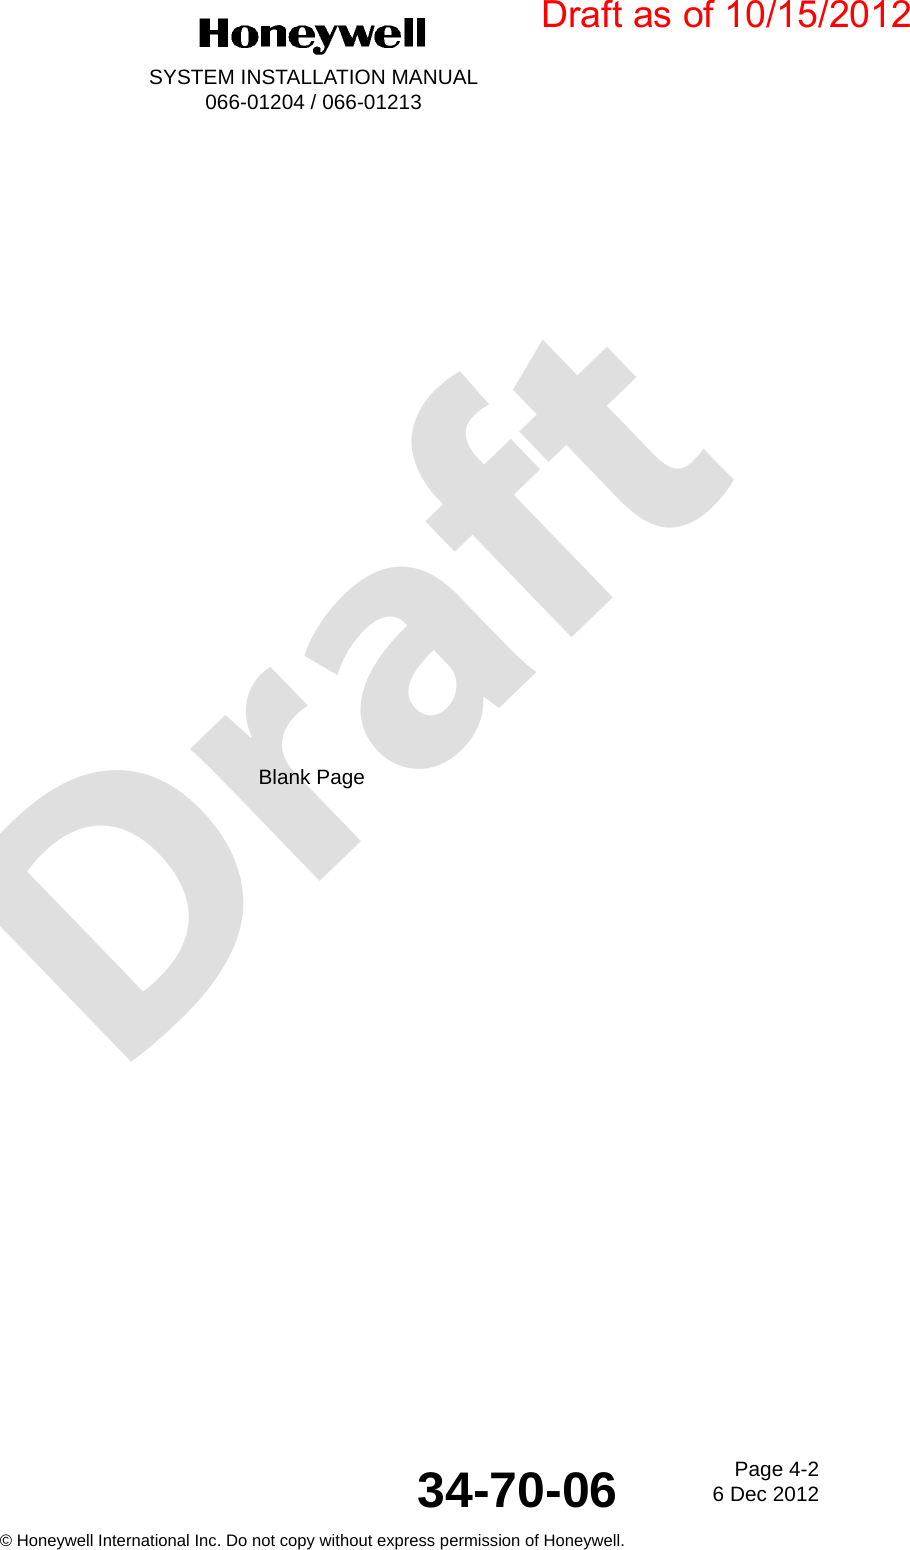 DraftPage 4-26 Dec 201234-70-06SYSTEM INSTALLATION MANUAL066-01204 / 066-01213© Honeywell International Inc. Do not copy without express permission of Honeywell.Blank PageDraft as of 10/15/2012